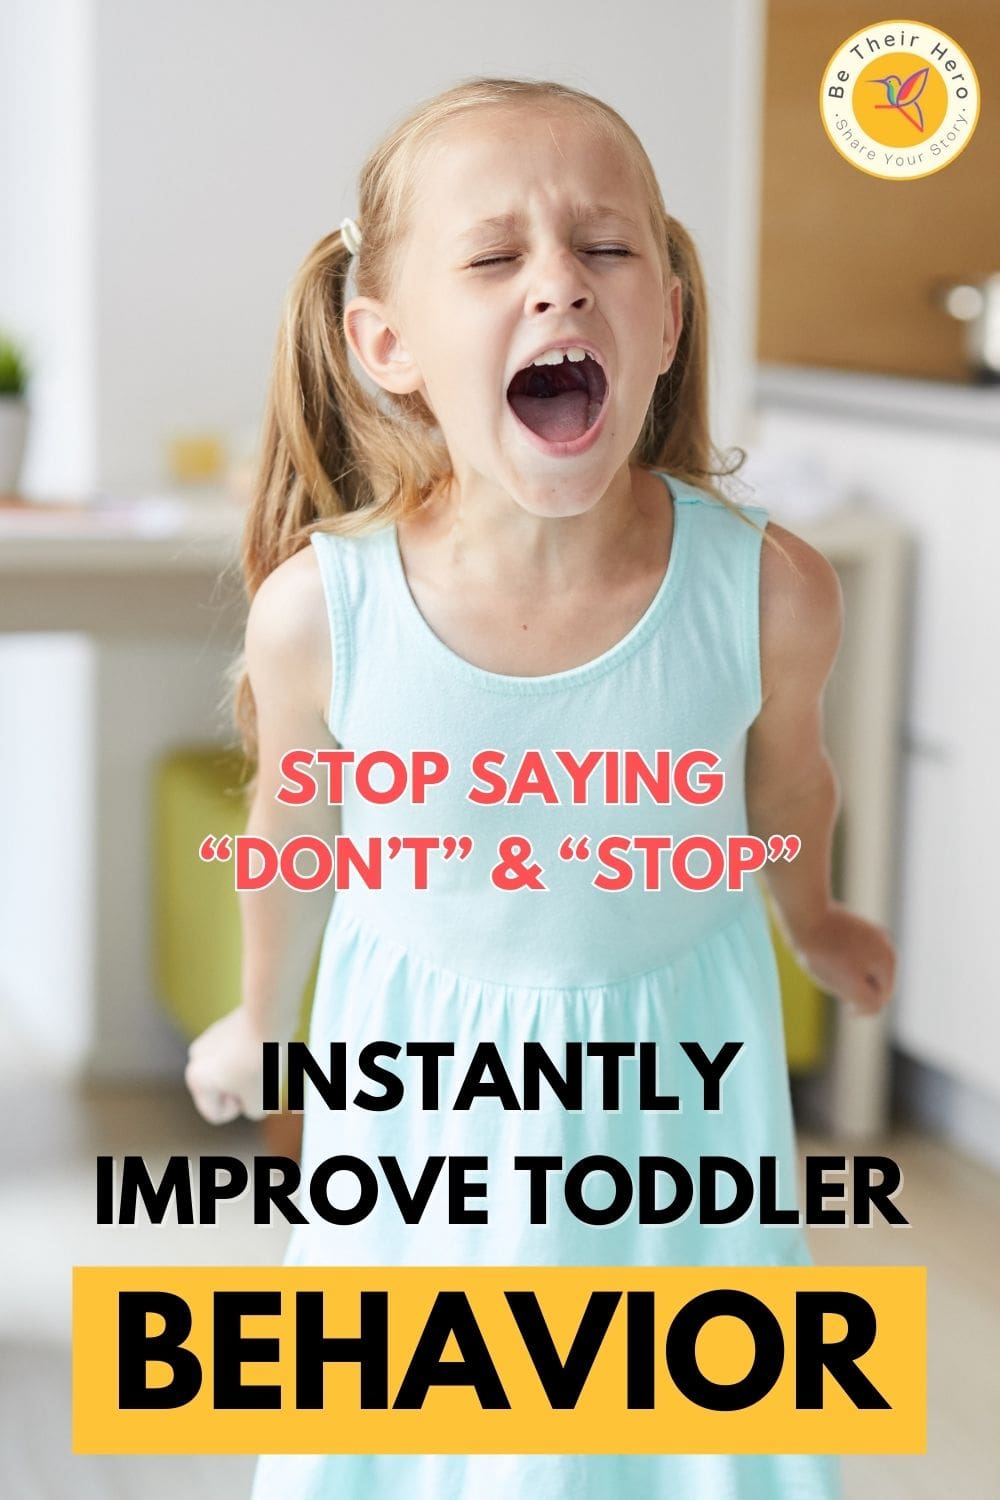 Instantly Improve Toddler Behavior. Stop Saying “Don’t” & “Stop”